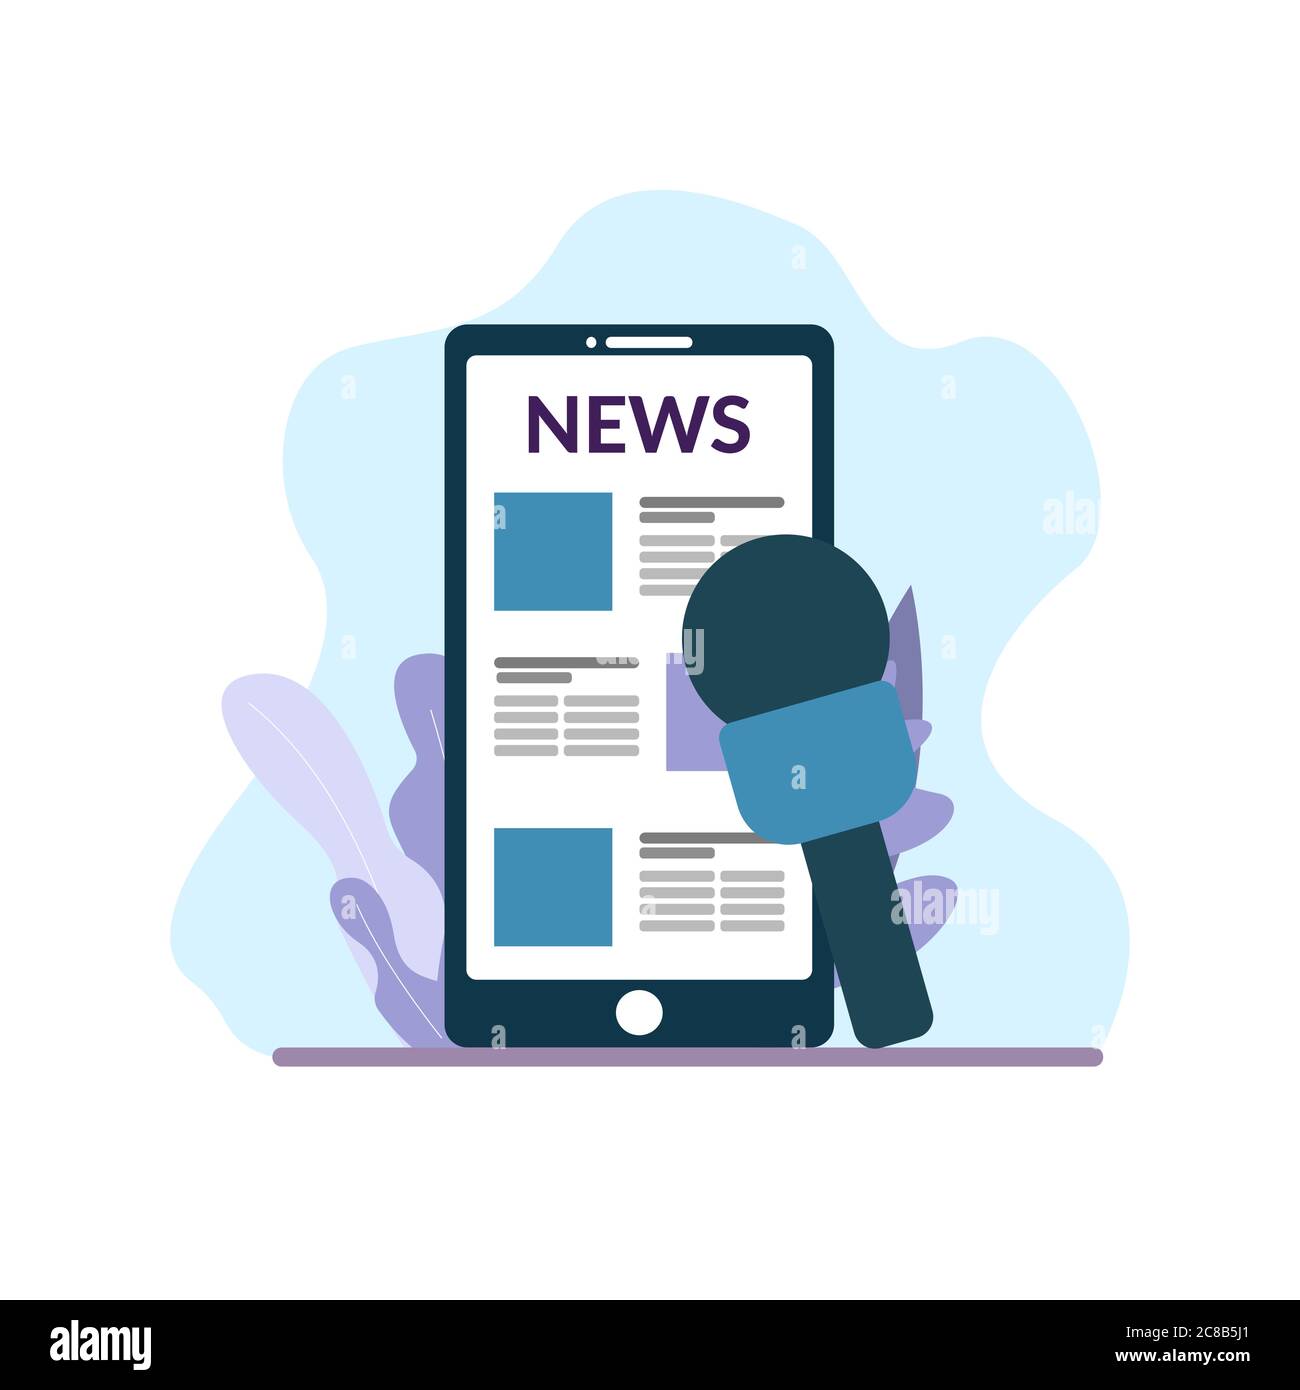 Online reading news. News on mobile phone and microphone for interview with decorations. Flat style illustration isolated on white background. Stock Vector